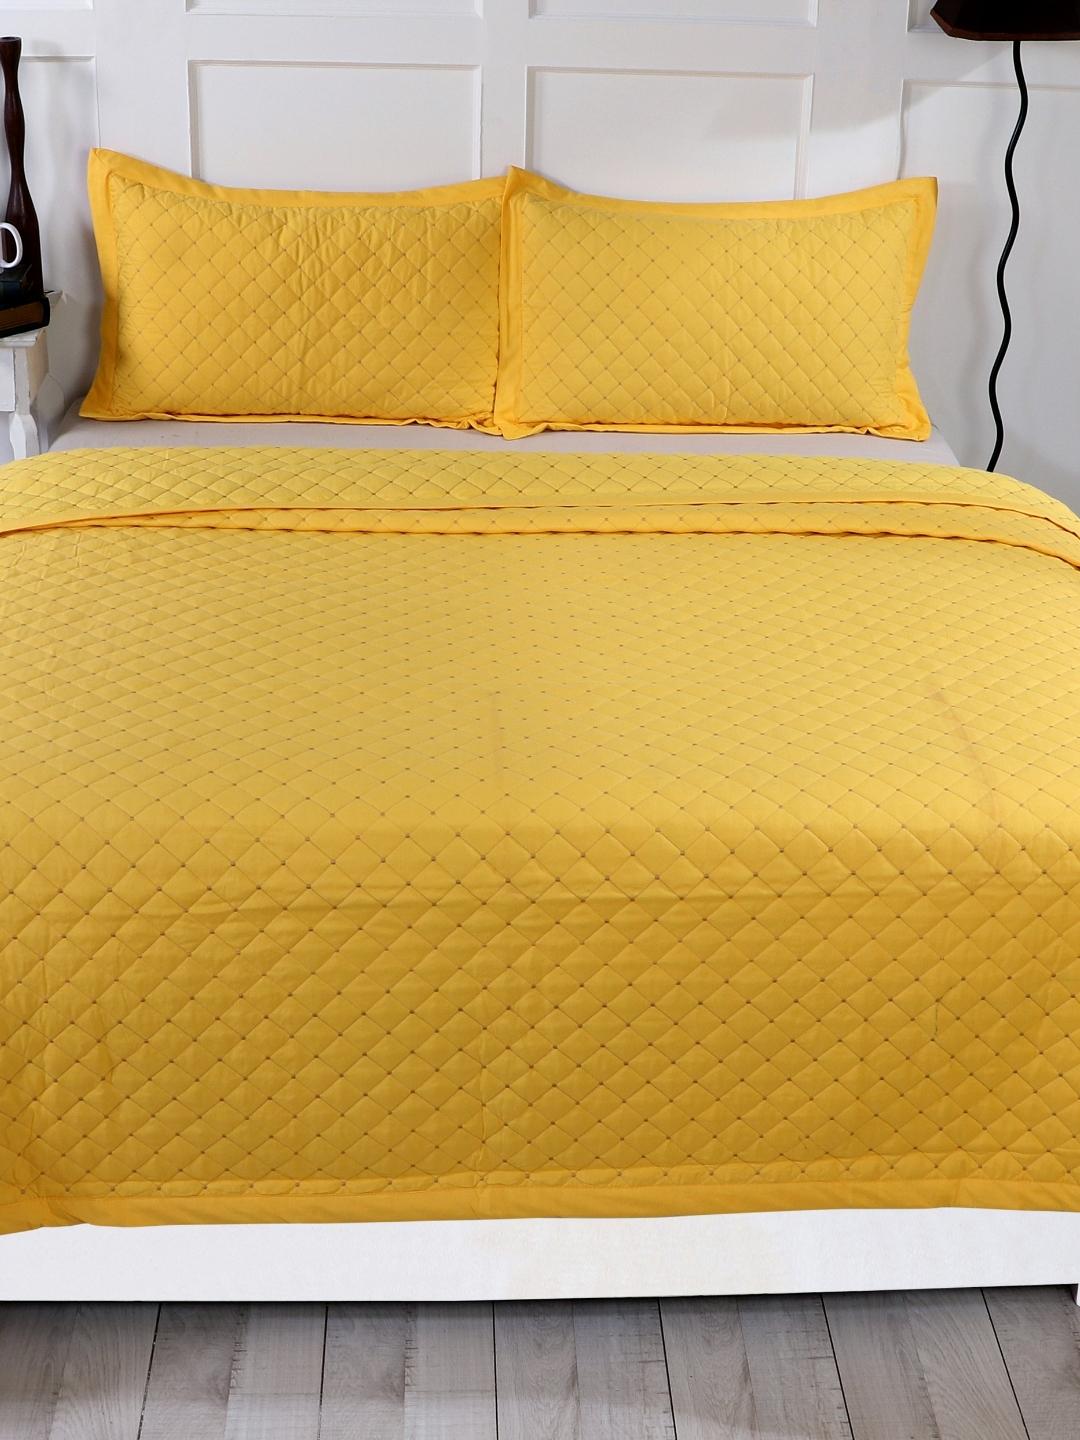 Double Bed Embroidered and Quilted Bedcover Set-Mustard Yellow